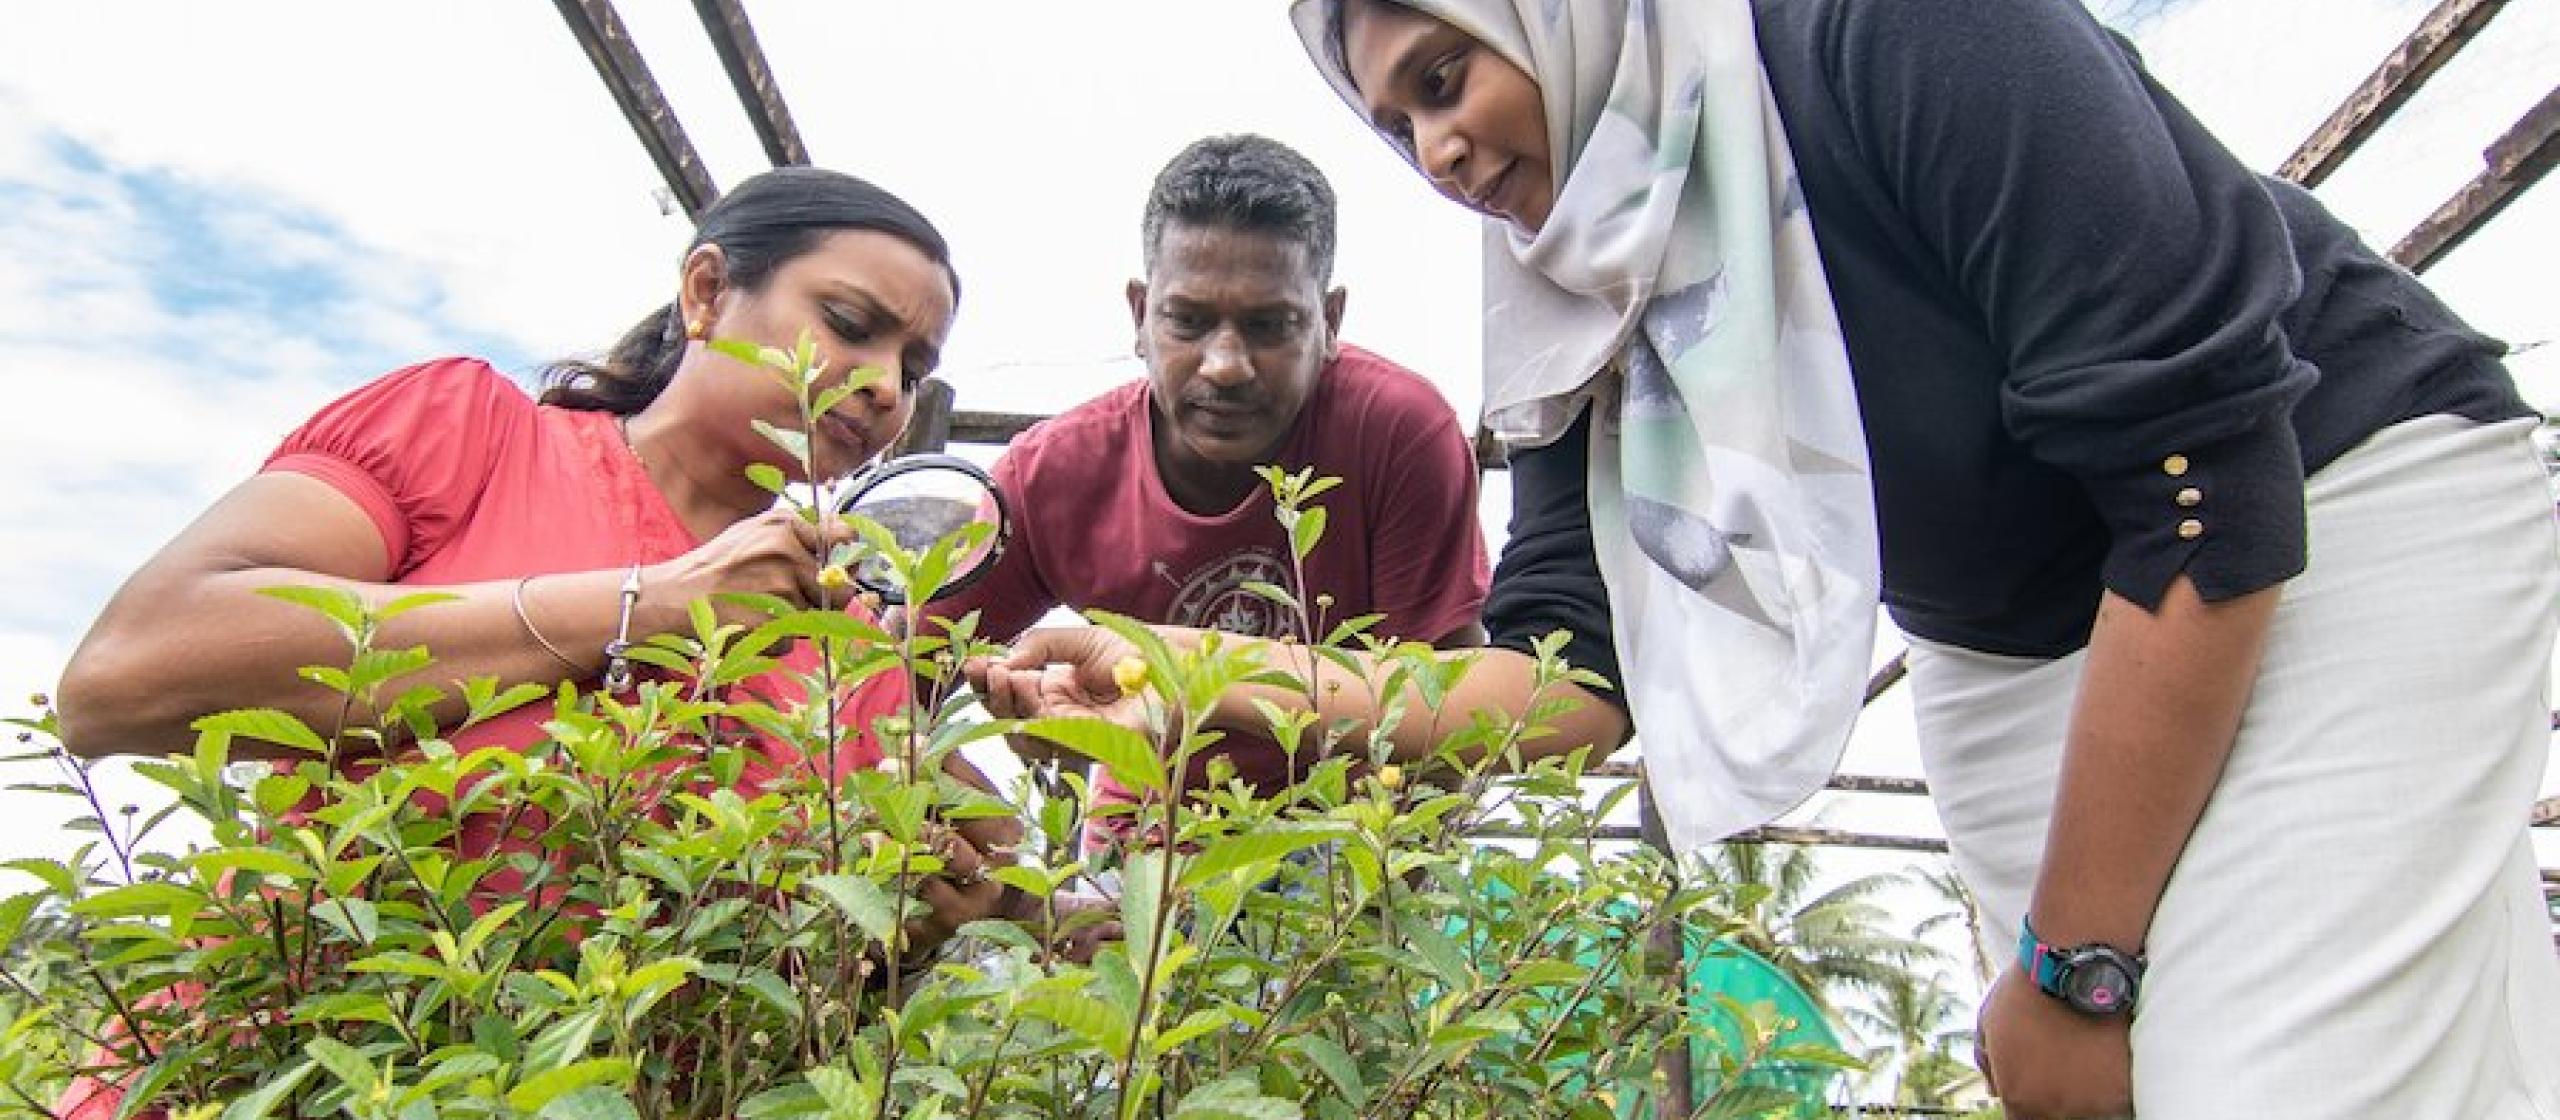 MWF Candidate for the inaugural 2020 cohort, Aradhana Deesh with her colleagues (Asma Begum far right and Pranesh Chand middle) at the Fijian Ministry of Agriculture’s first ever biocontrol nursery in Koronvia, Fiji.